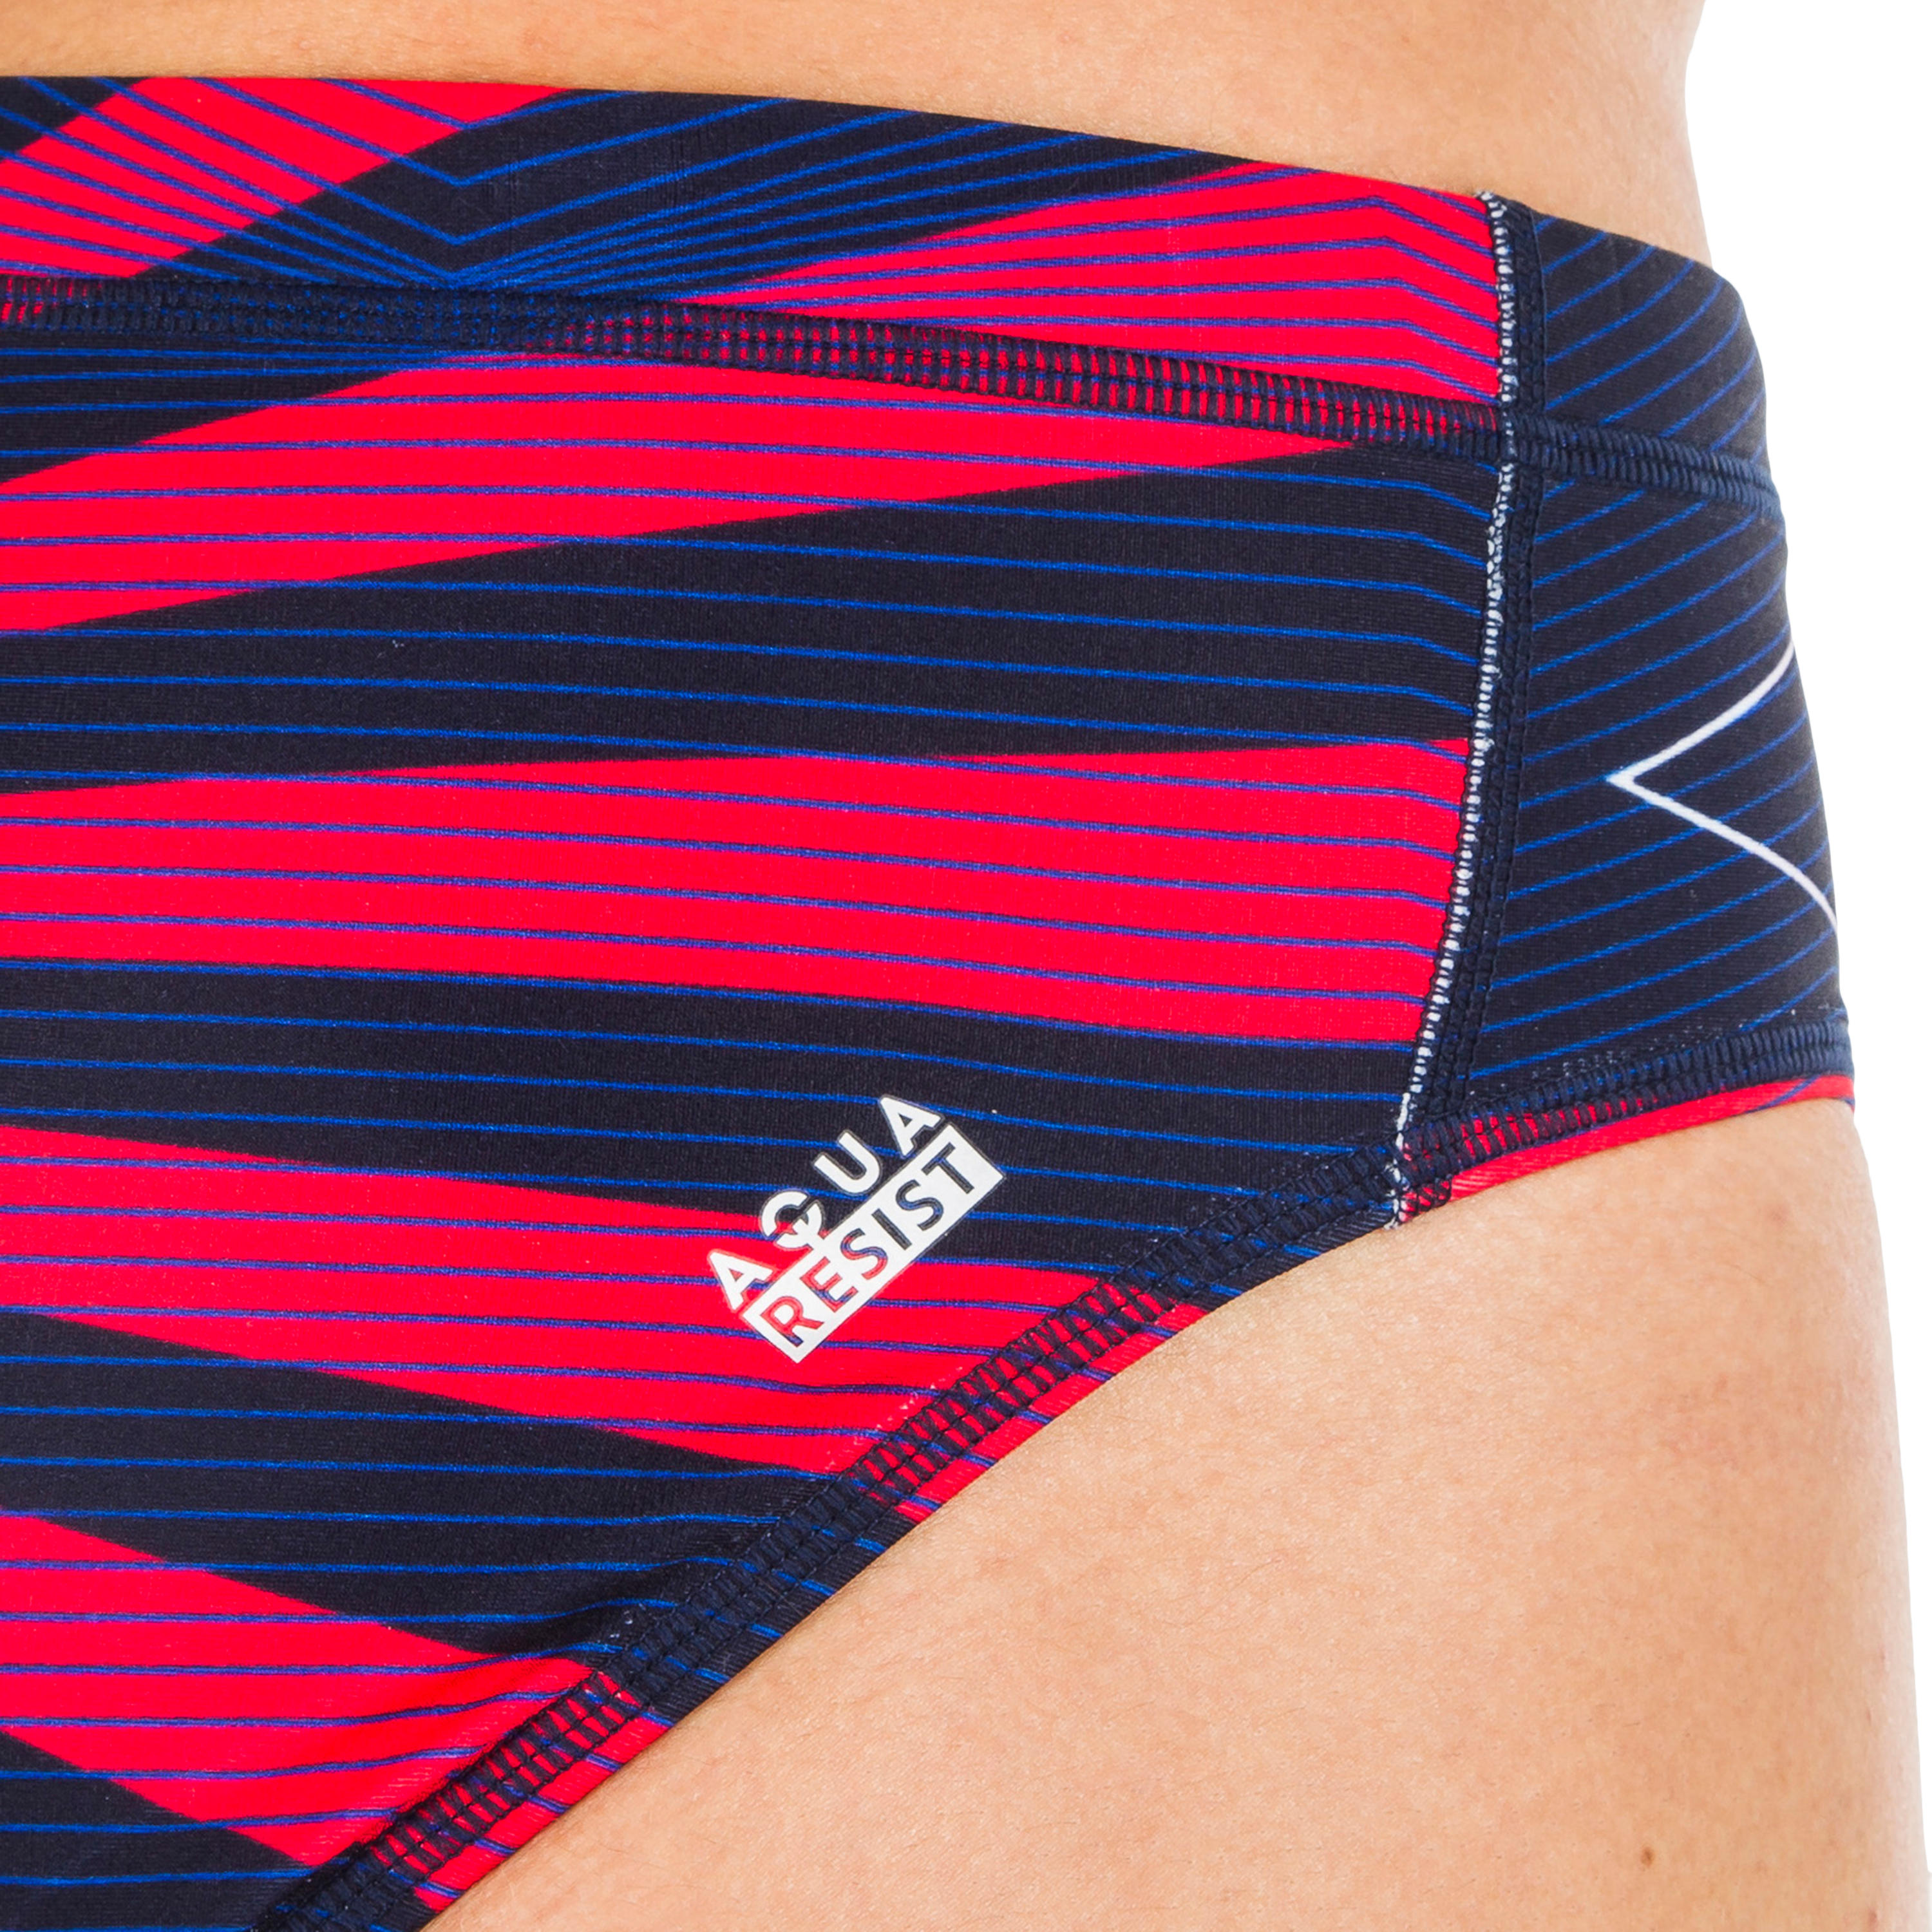 MEN'S WATER POLO SWIMMING BRIEFS - JAPAN BLUE RED 6/6